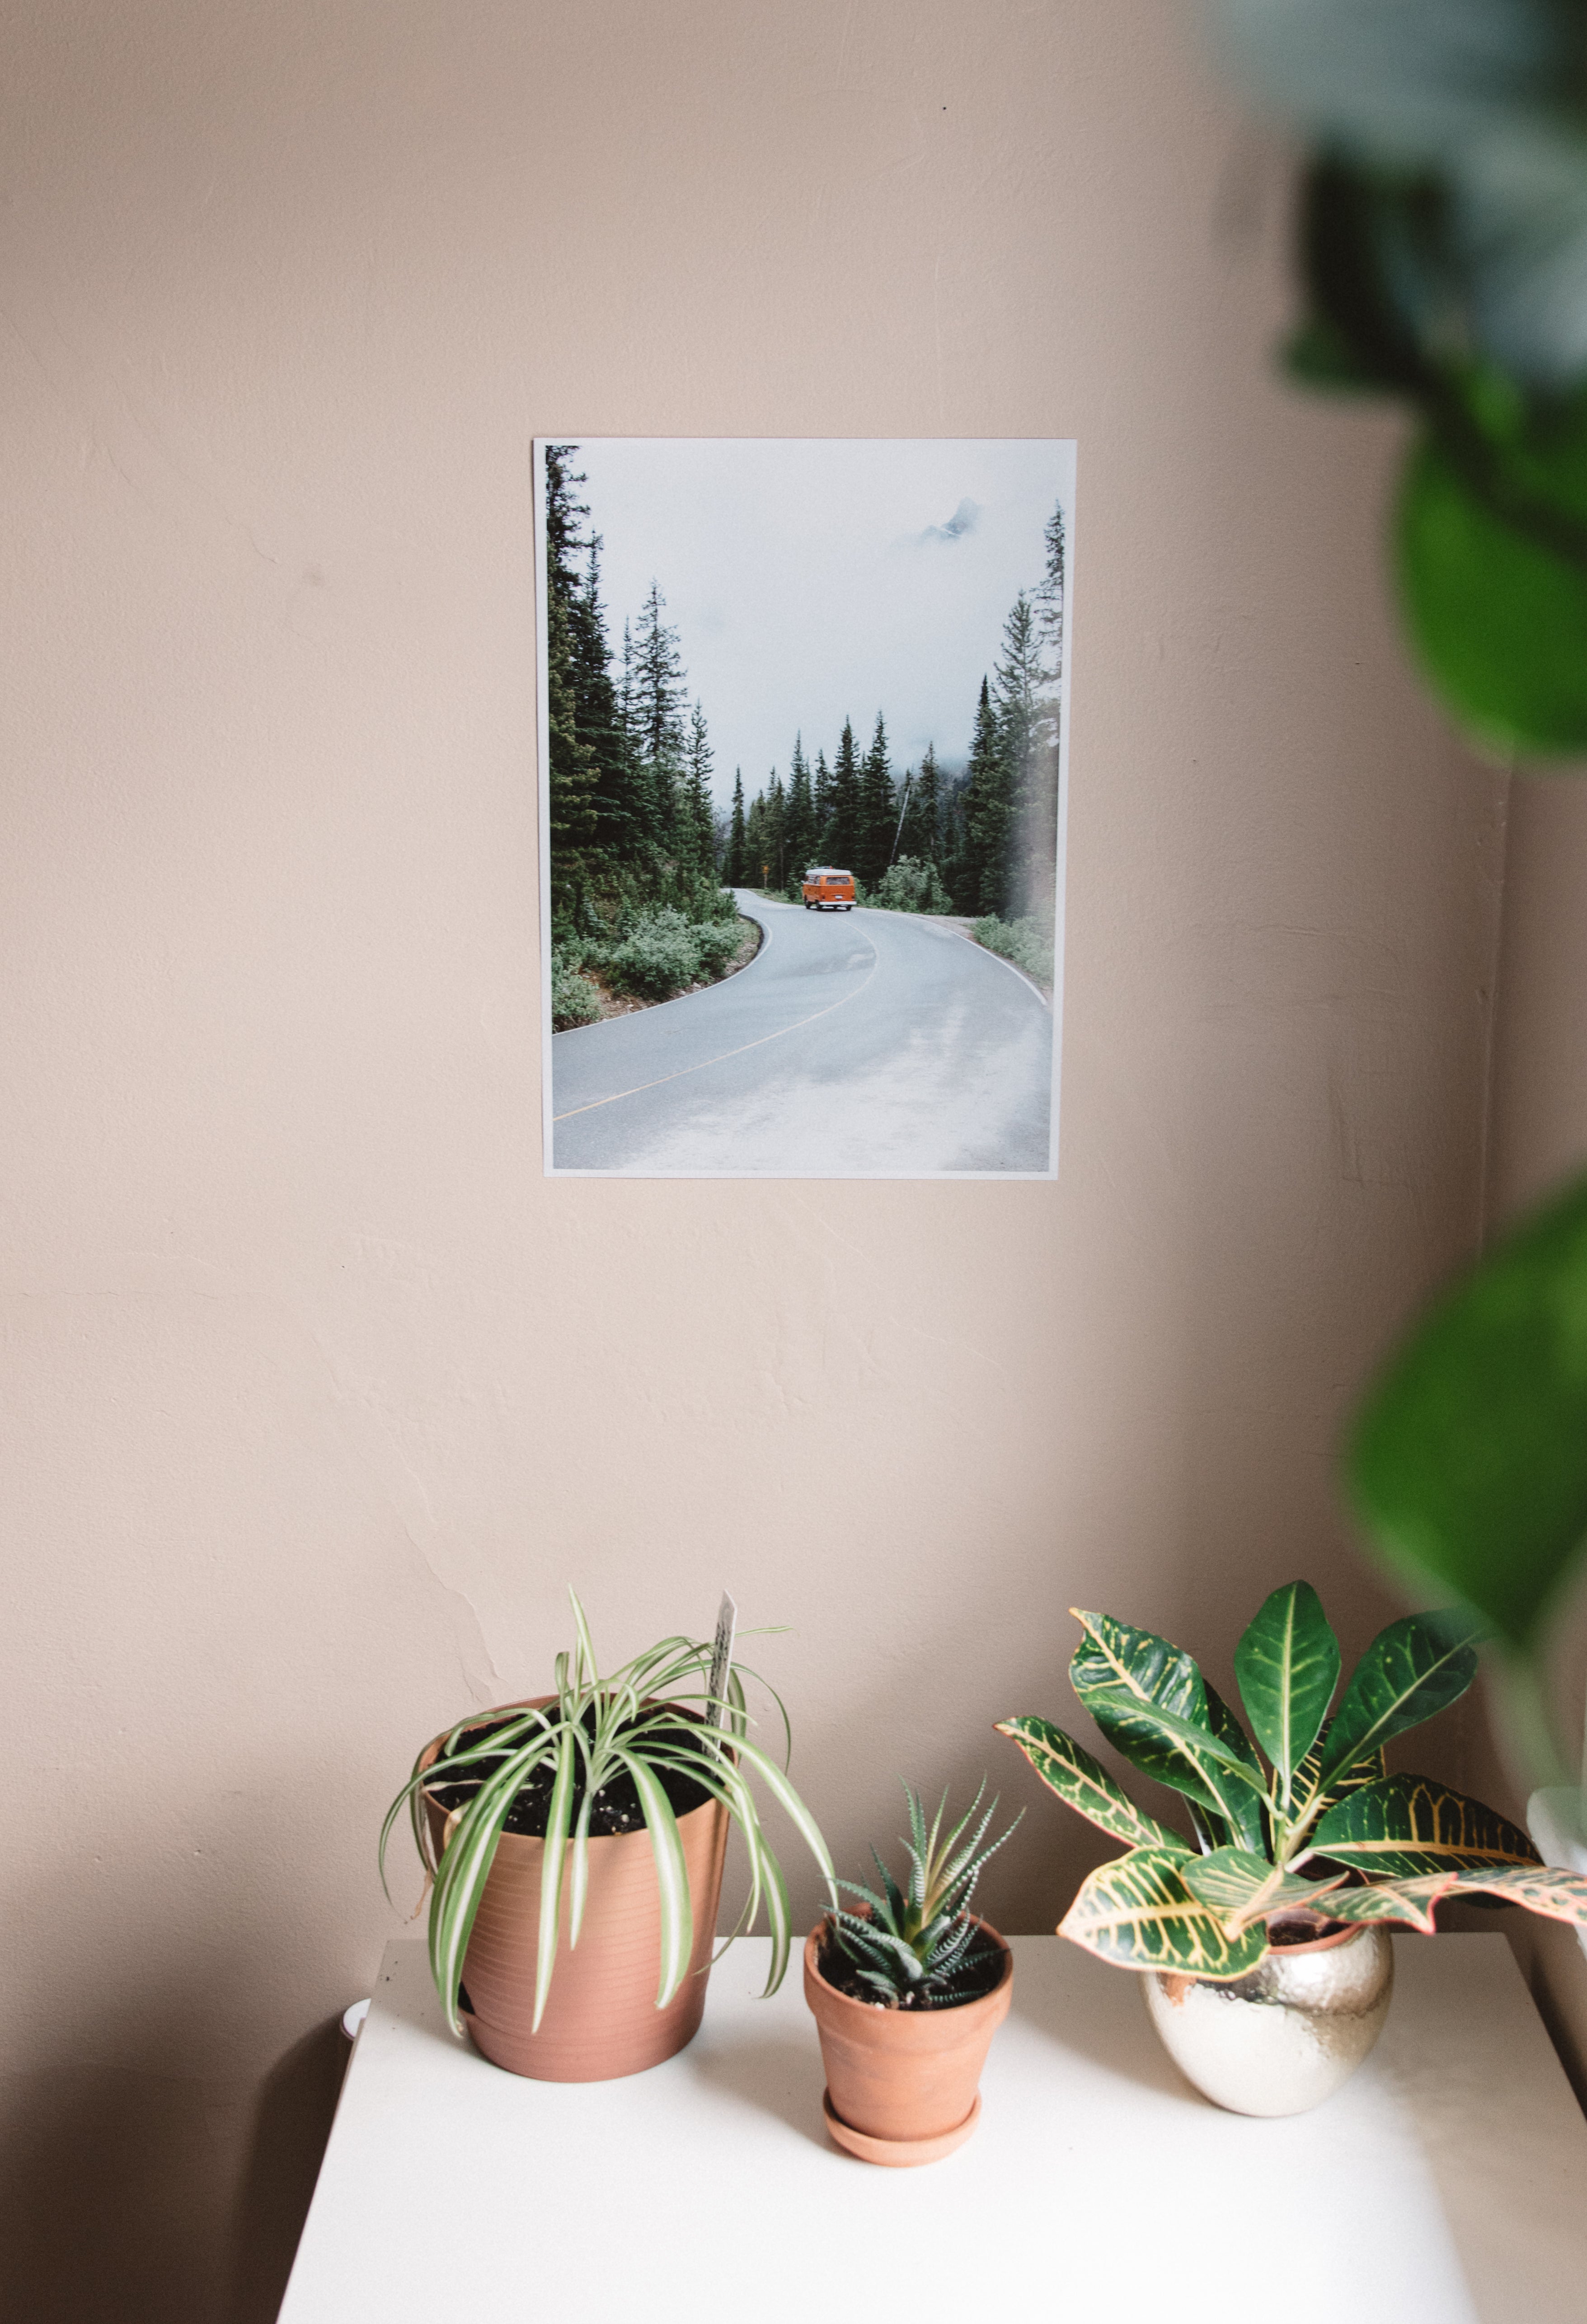 Van in the Mountains Poster Canadian Rockies Home Decor Print